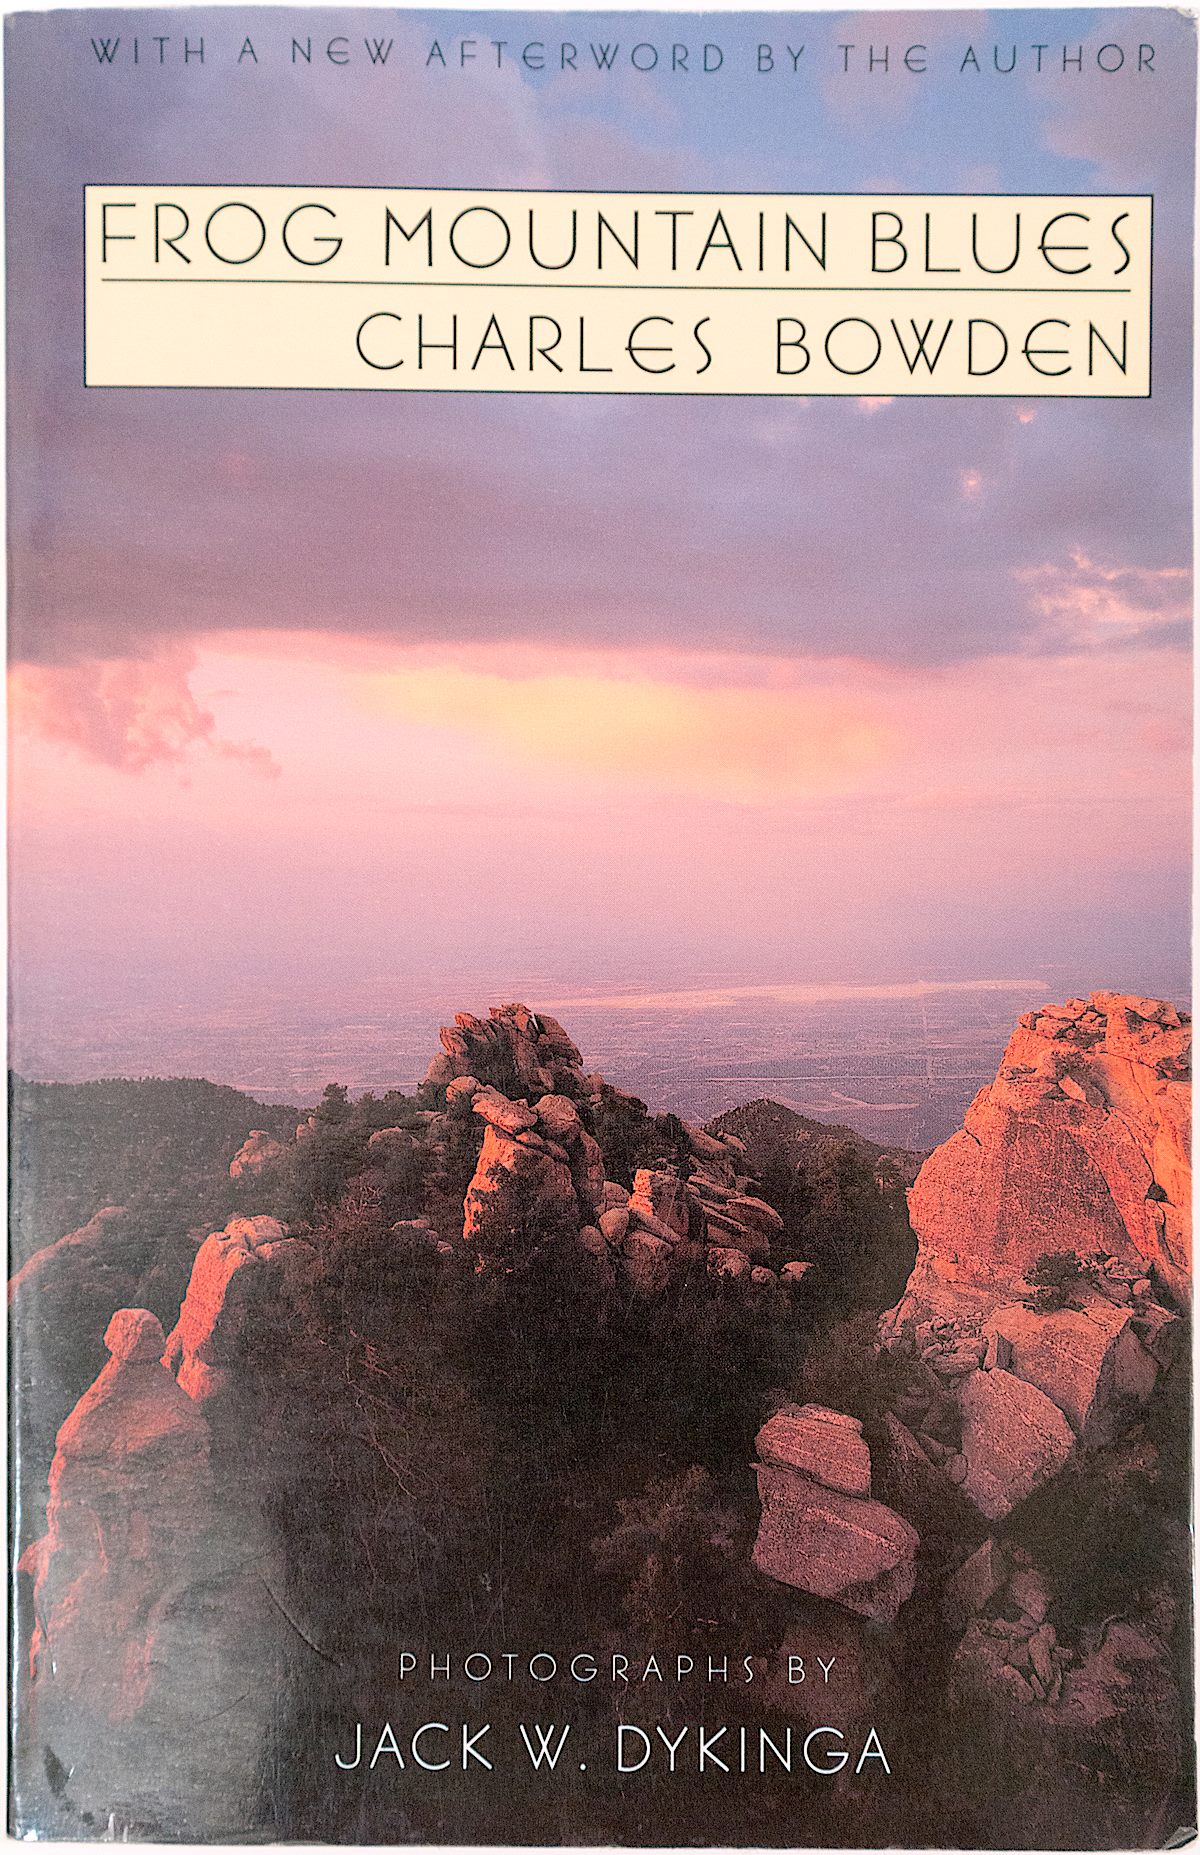 Frog Mountain Blues, Charles Bowden with Photographs by Jack W. Dykinga. December 2016.